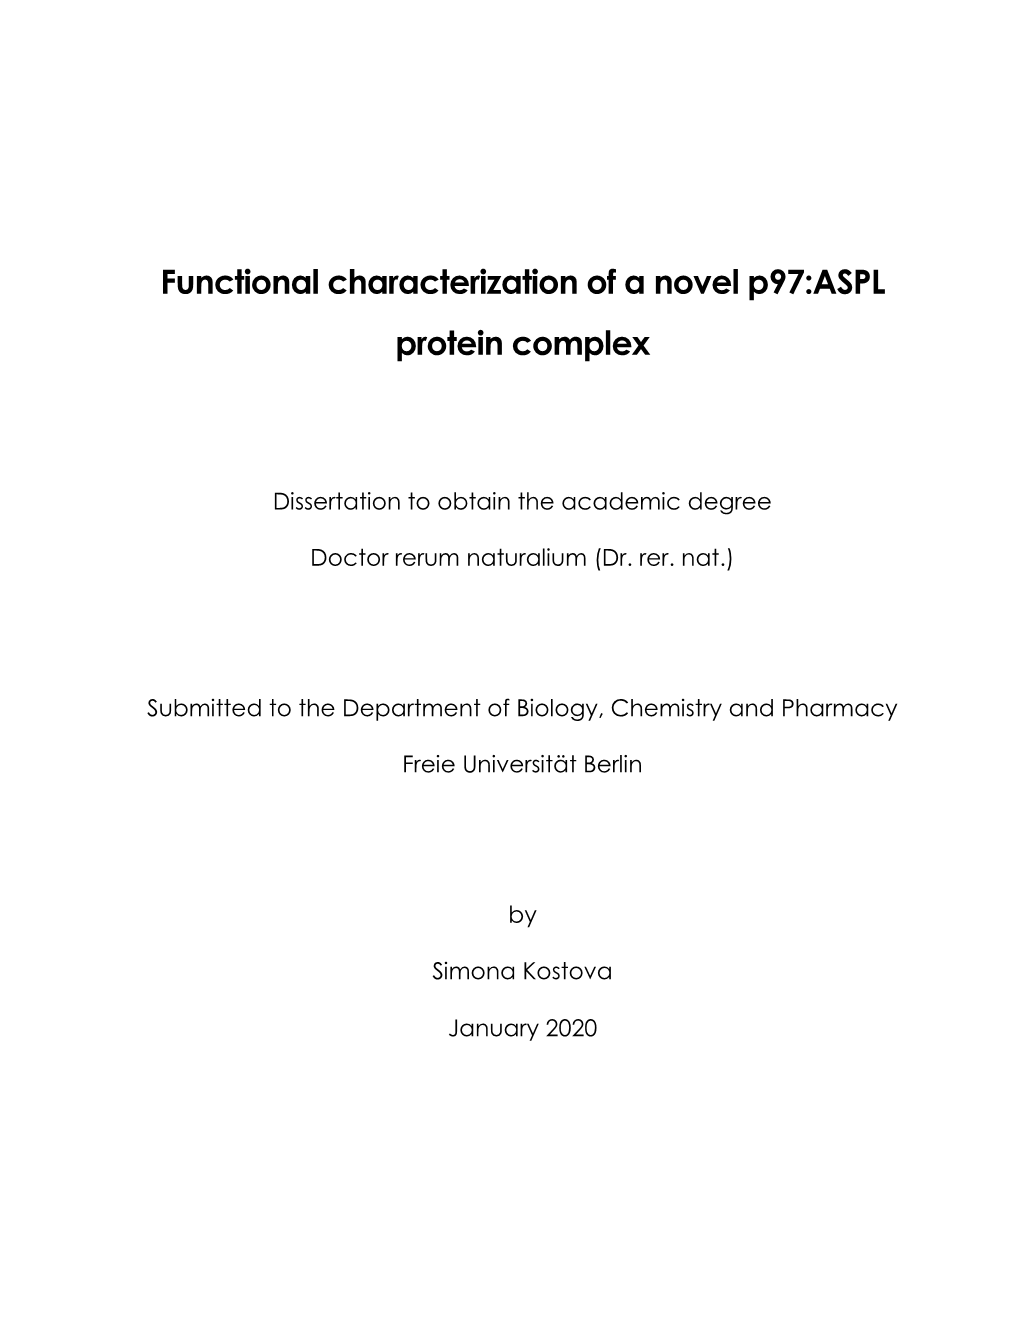 Functional Characterization of a Novel P97:ASPL Protein Complex